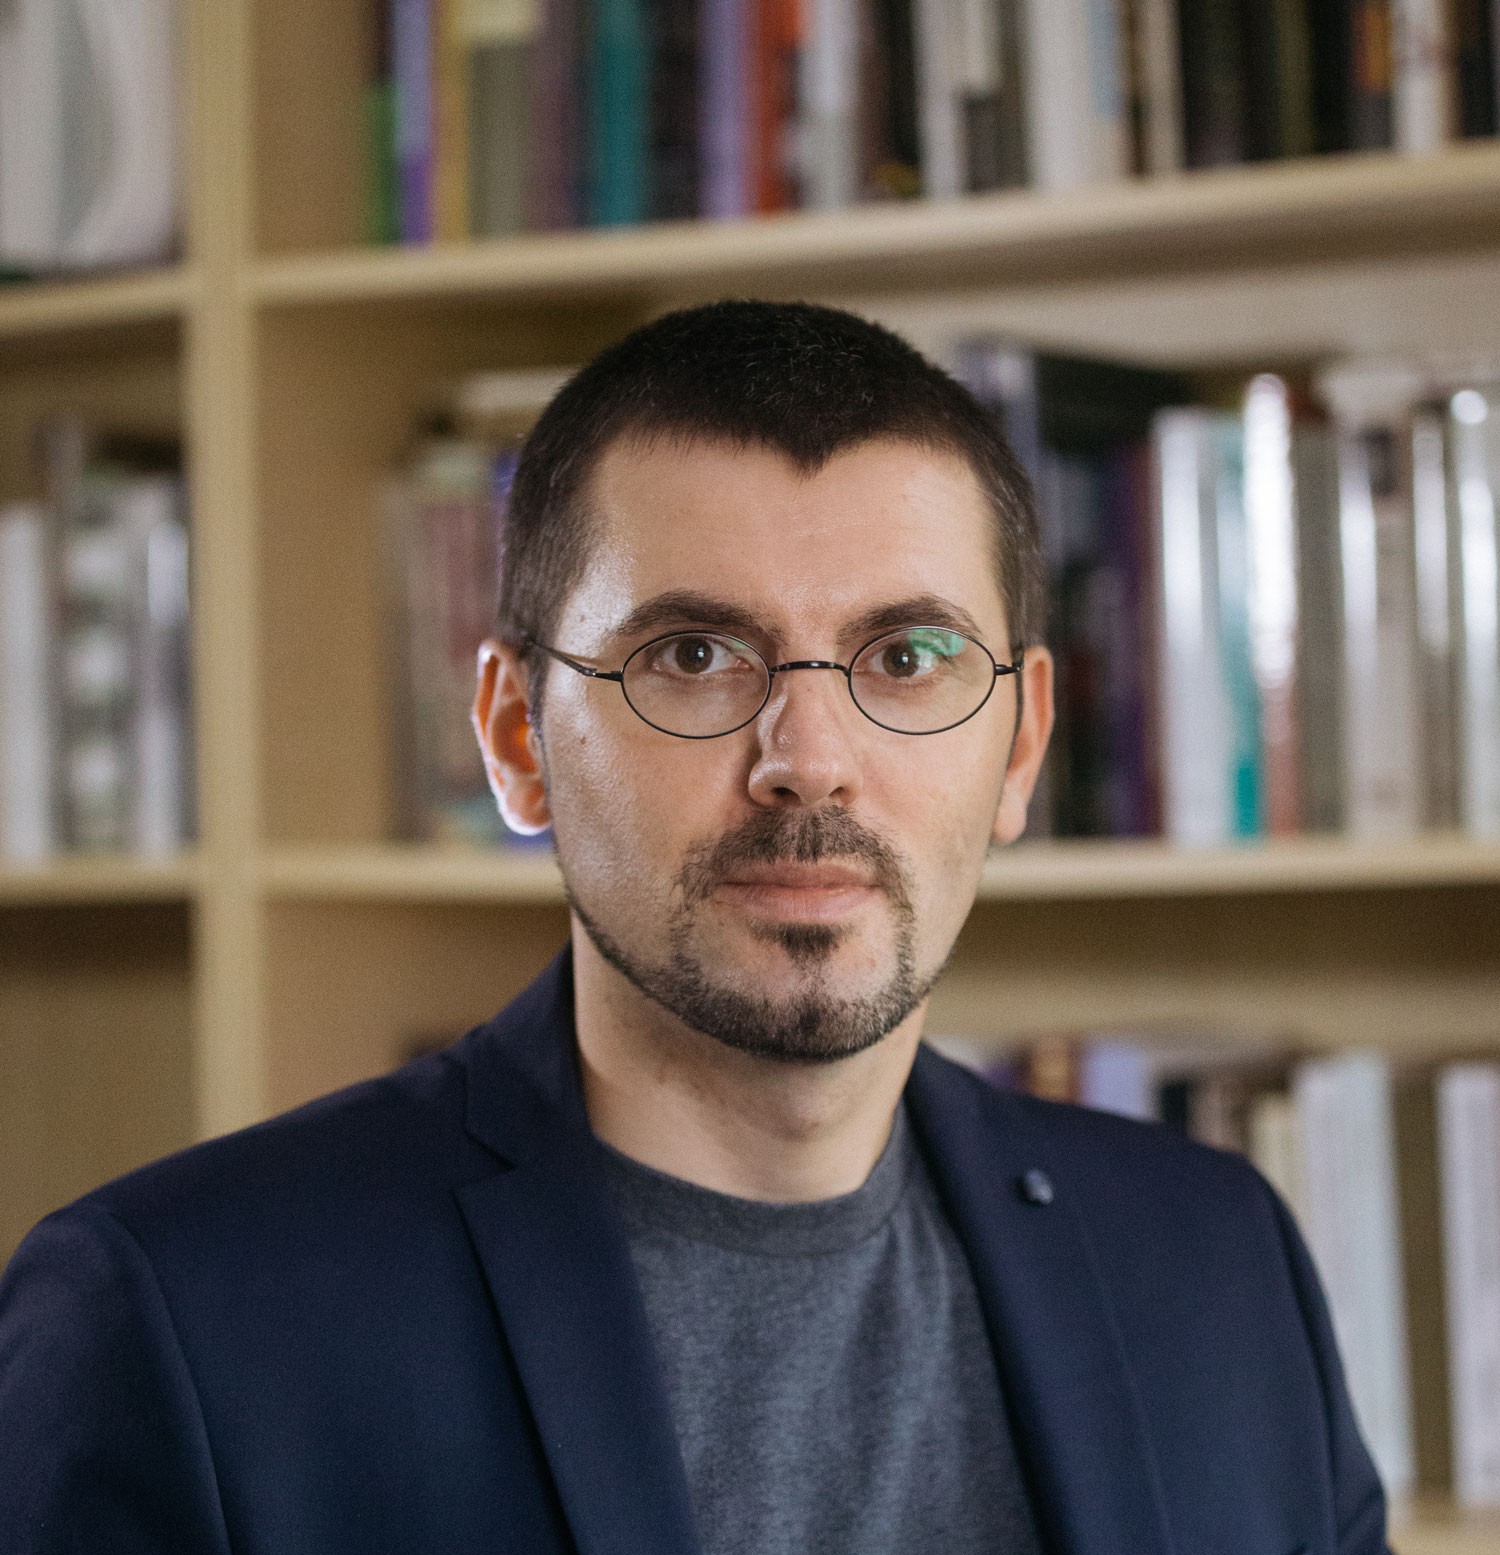 Olesksandr Pankieiev is ASAUS's president and one of the conference organizers